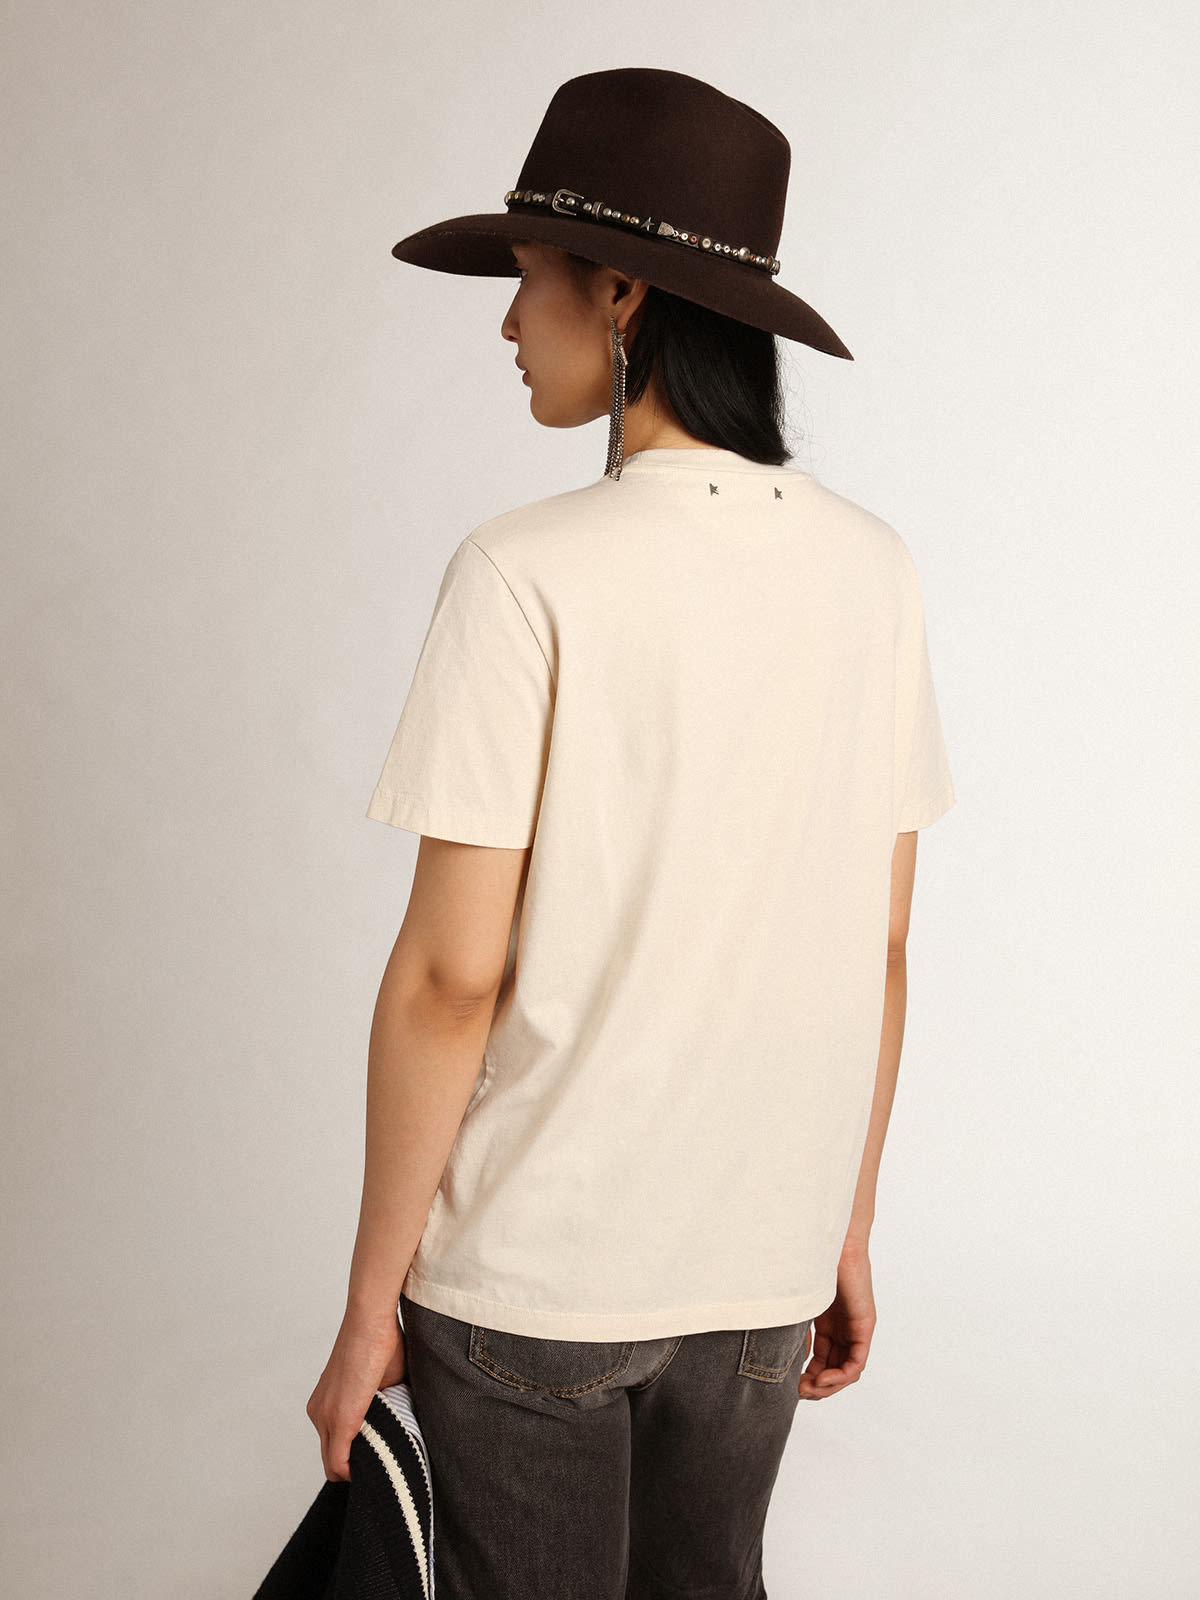 Golden Goose - Bone-white Journey Collection T-shirt with black and bright-green lettering on the front in 